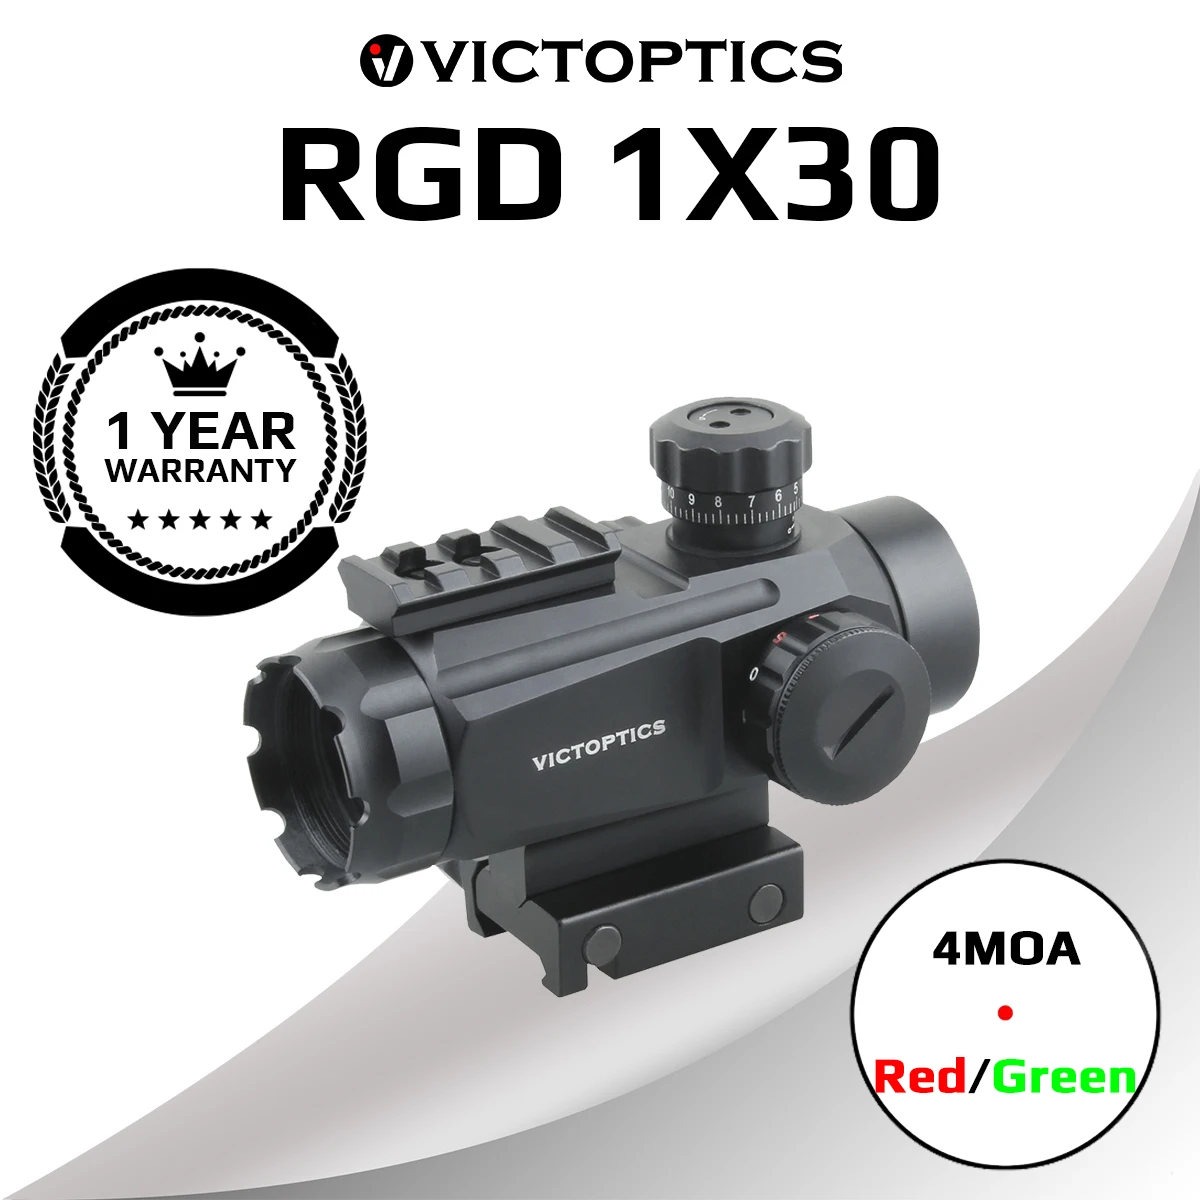 

VictOptics RGD 1X30 Red Dot Sight 5 Levels 4MOA Red/Green Dot Designed For Real Fire Arms Tactical Optics Fit AR15 AK47